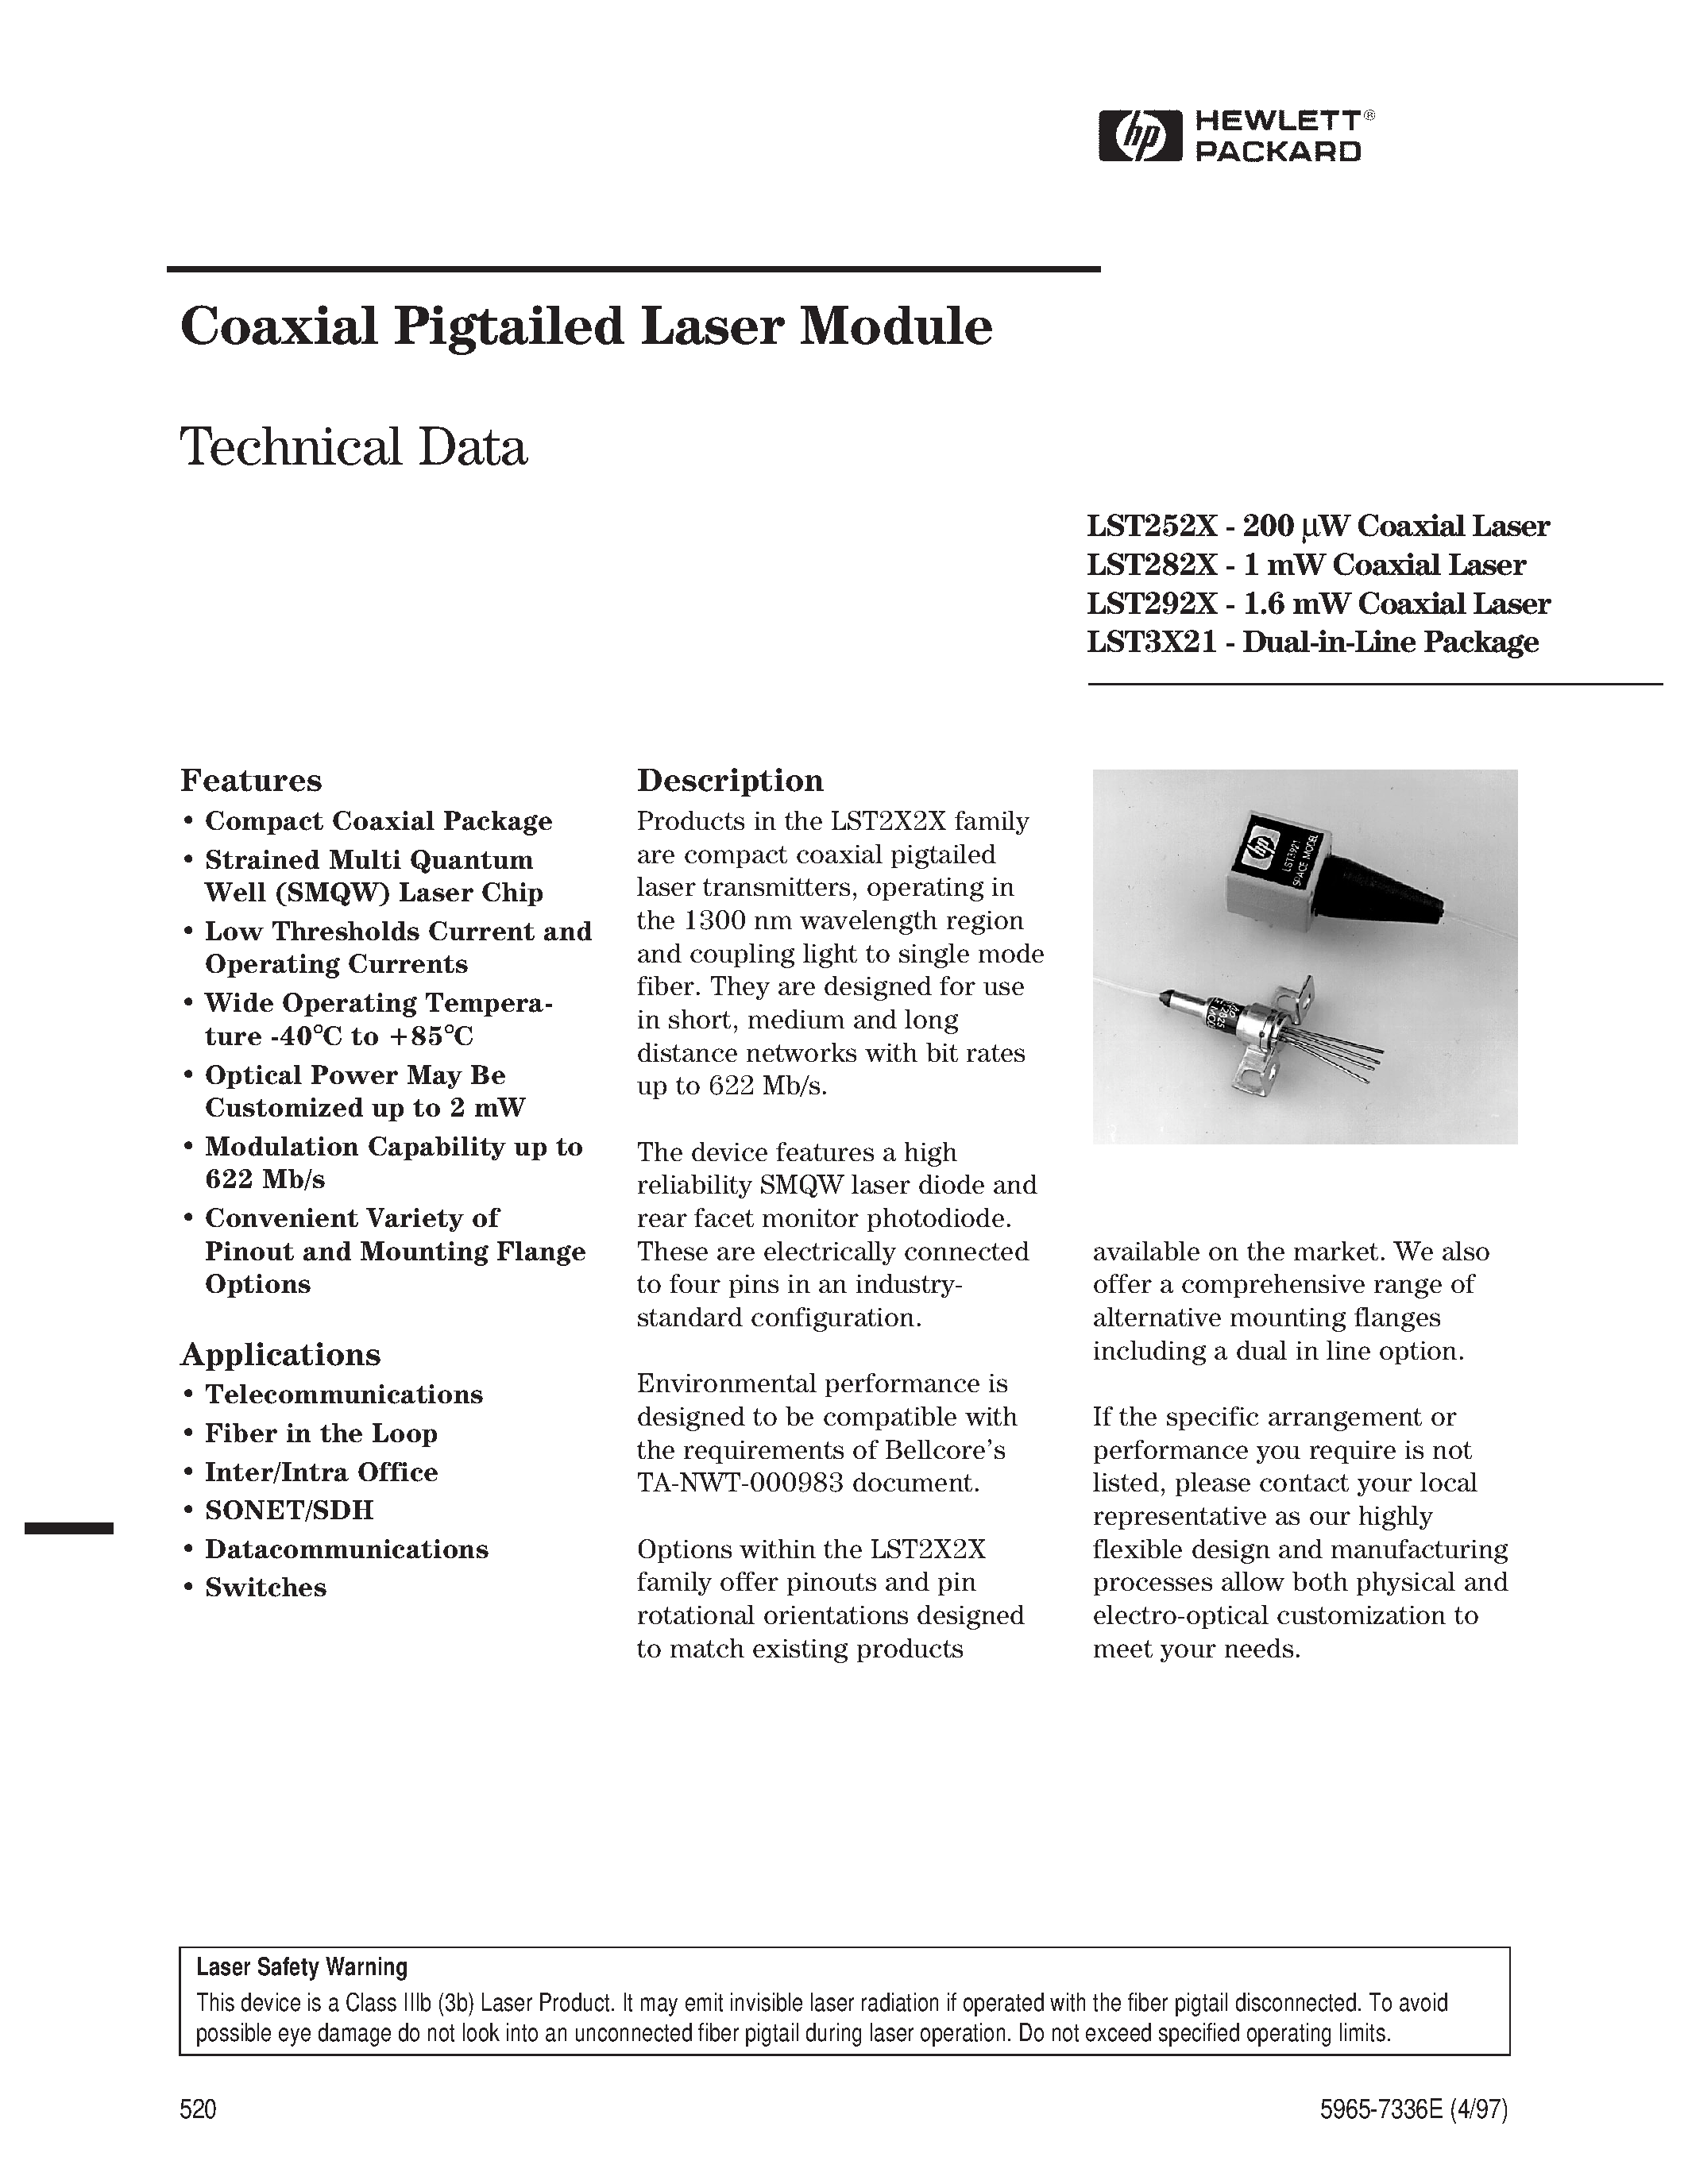 Даташит LST2425A-T-AP - Coaxial Pigtailed Laser Module страница 1